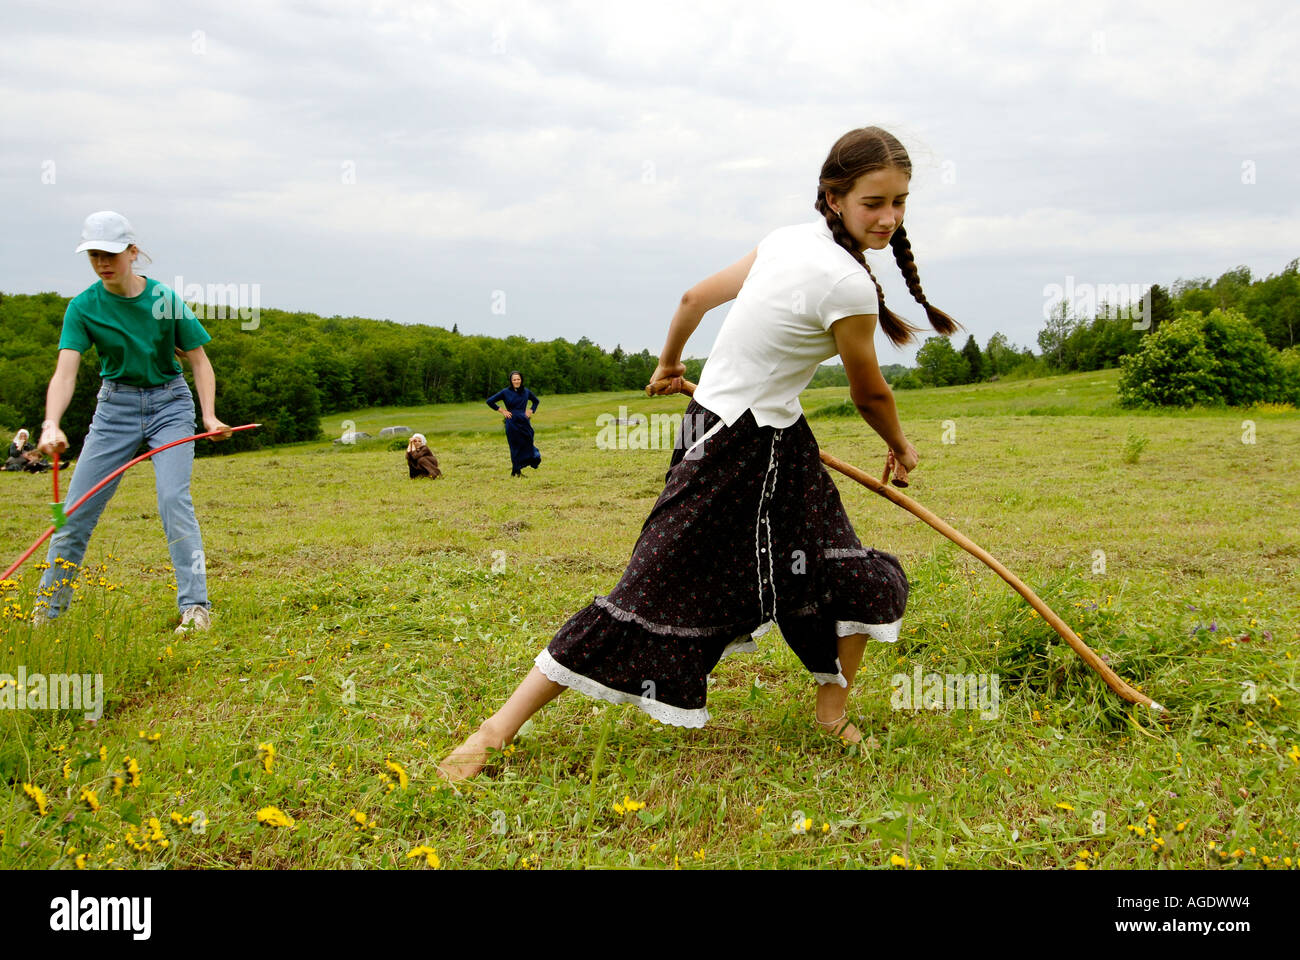 Stock image of a young farm girl in skirt and long braids scything or hand mowing a hay field Stock Photo